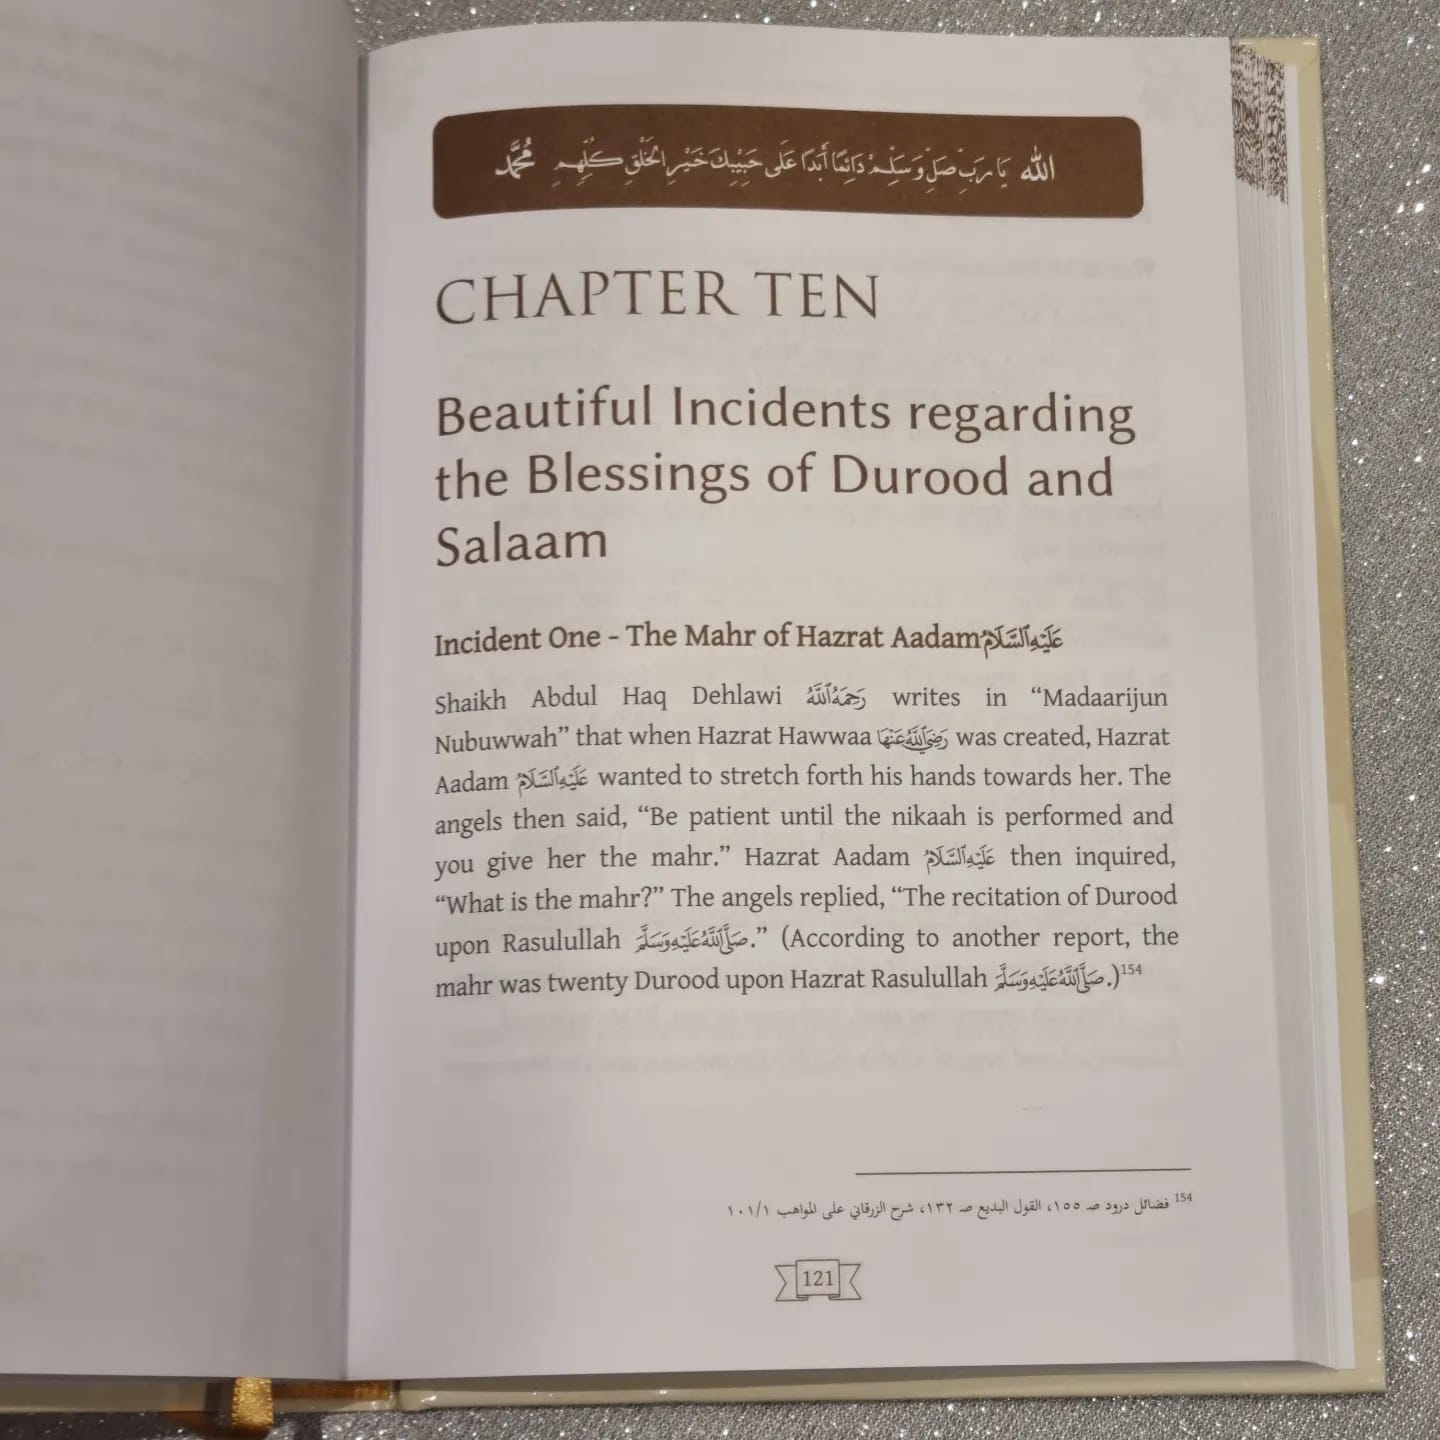 The Gift of Durood & Salaam